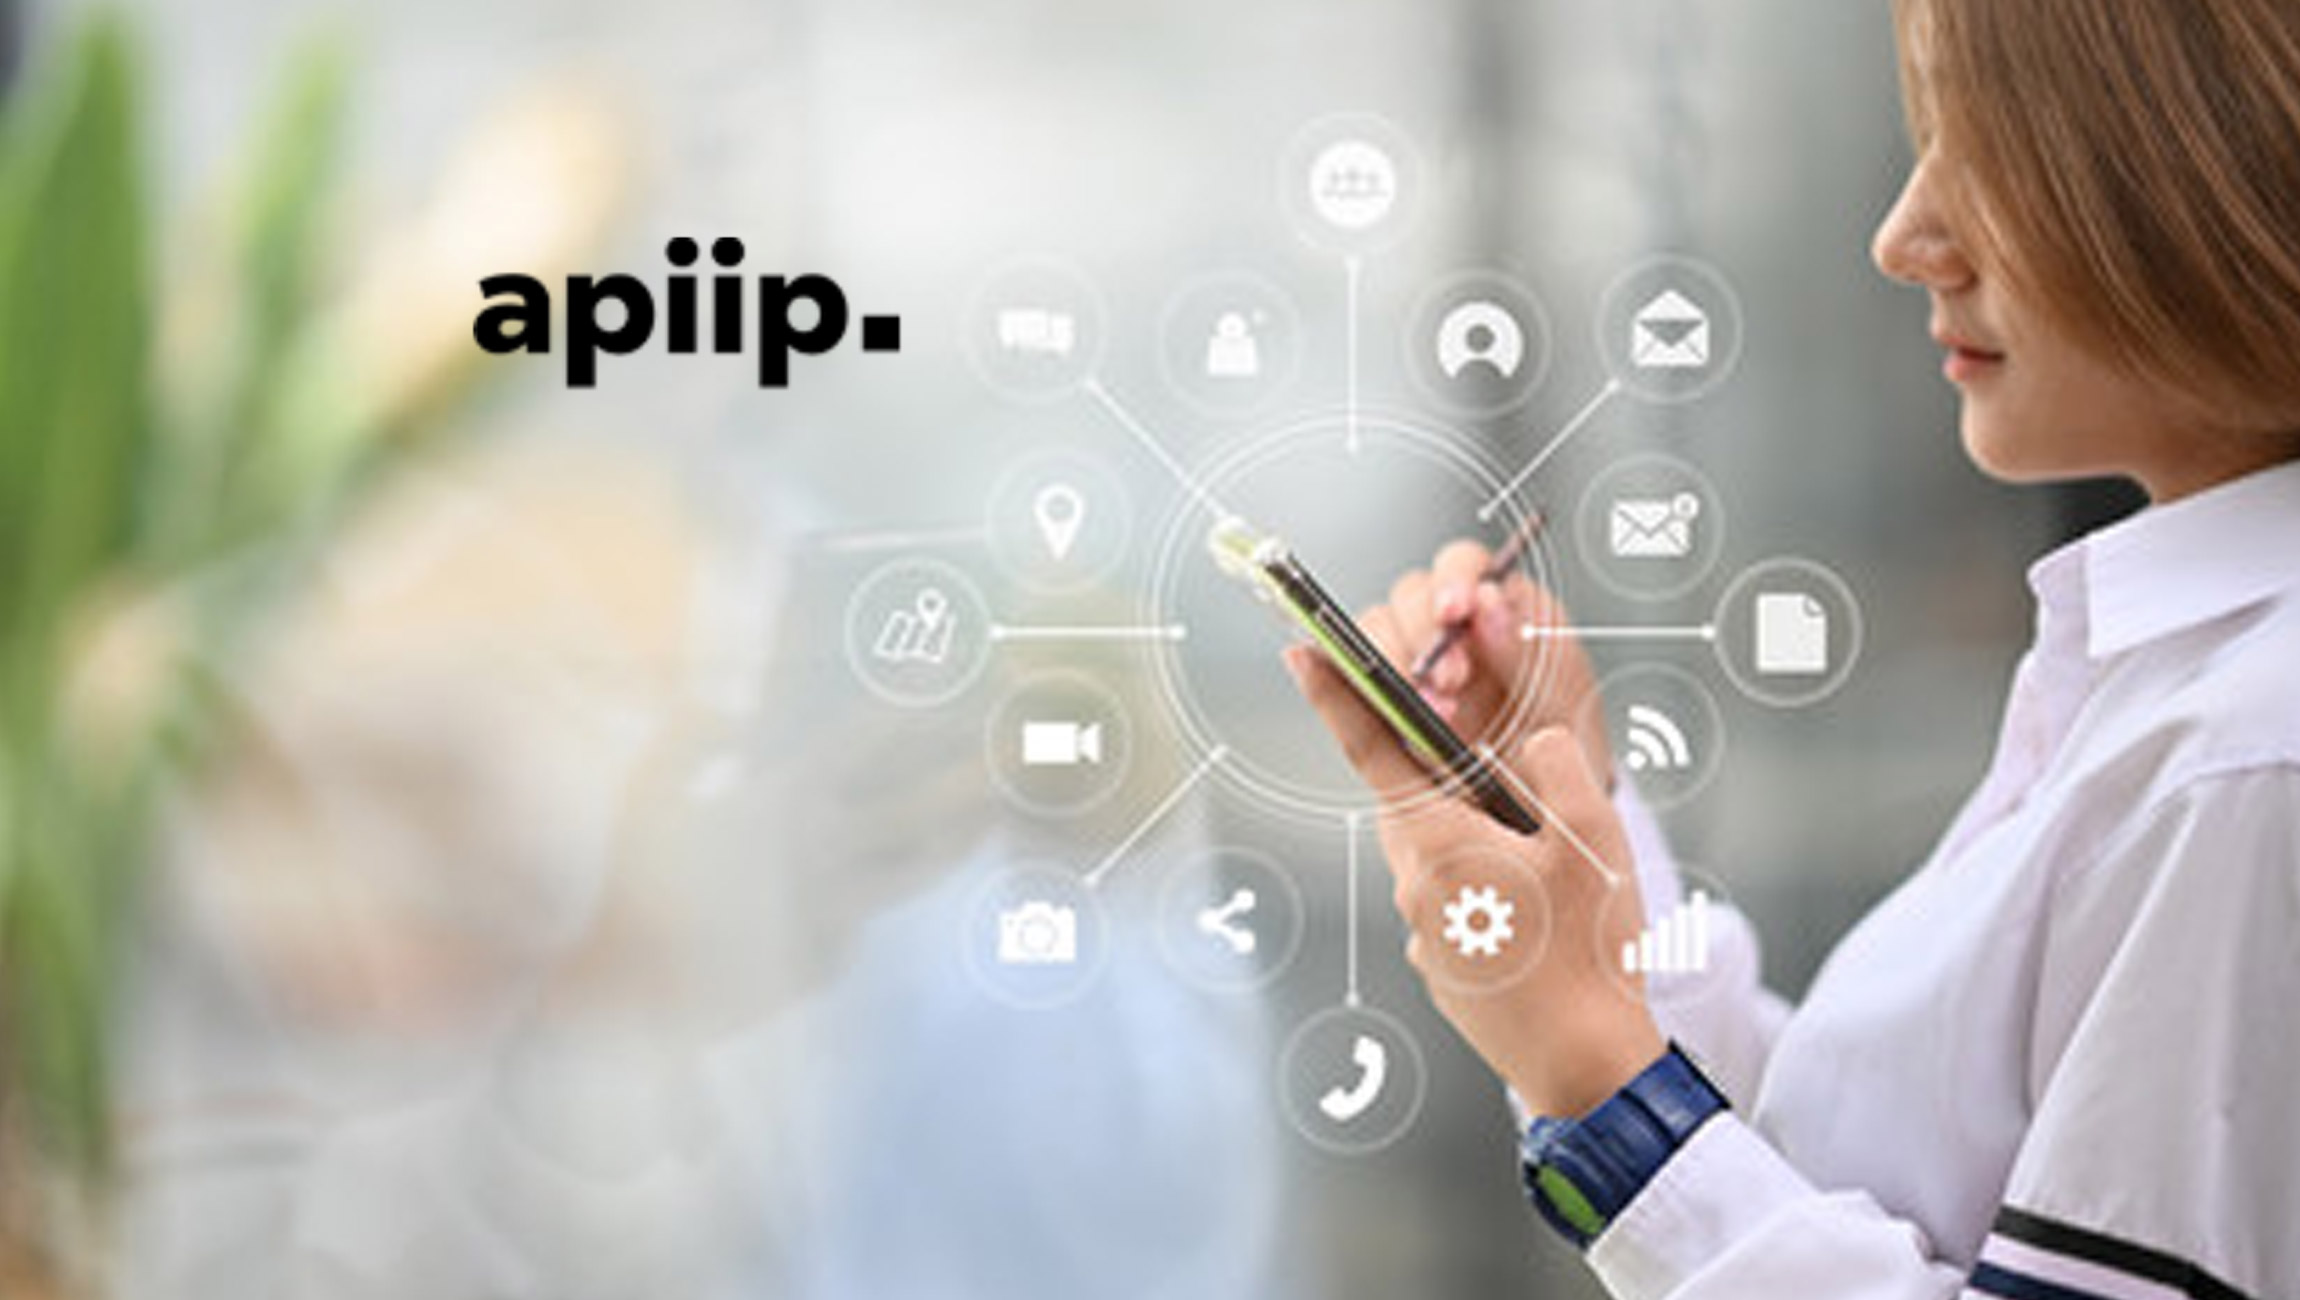 Apiip Expand IP To Location API Services to Verify 1 million+ Requests A Month 1